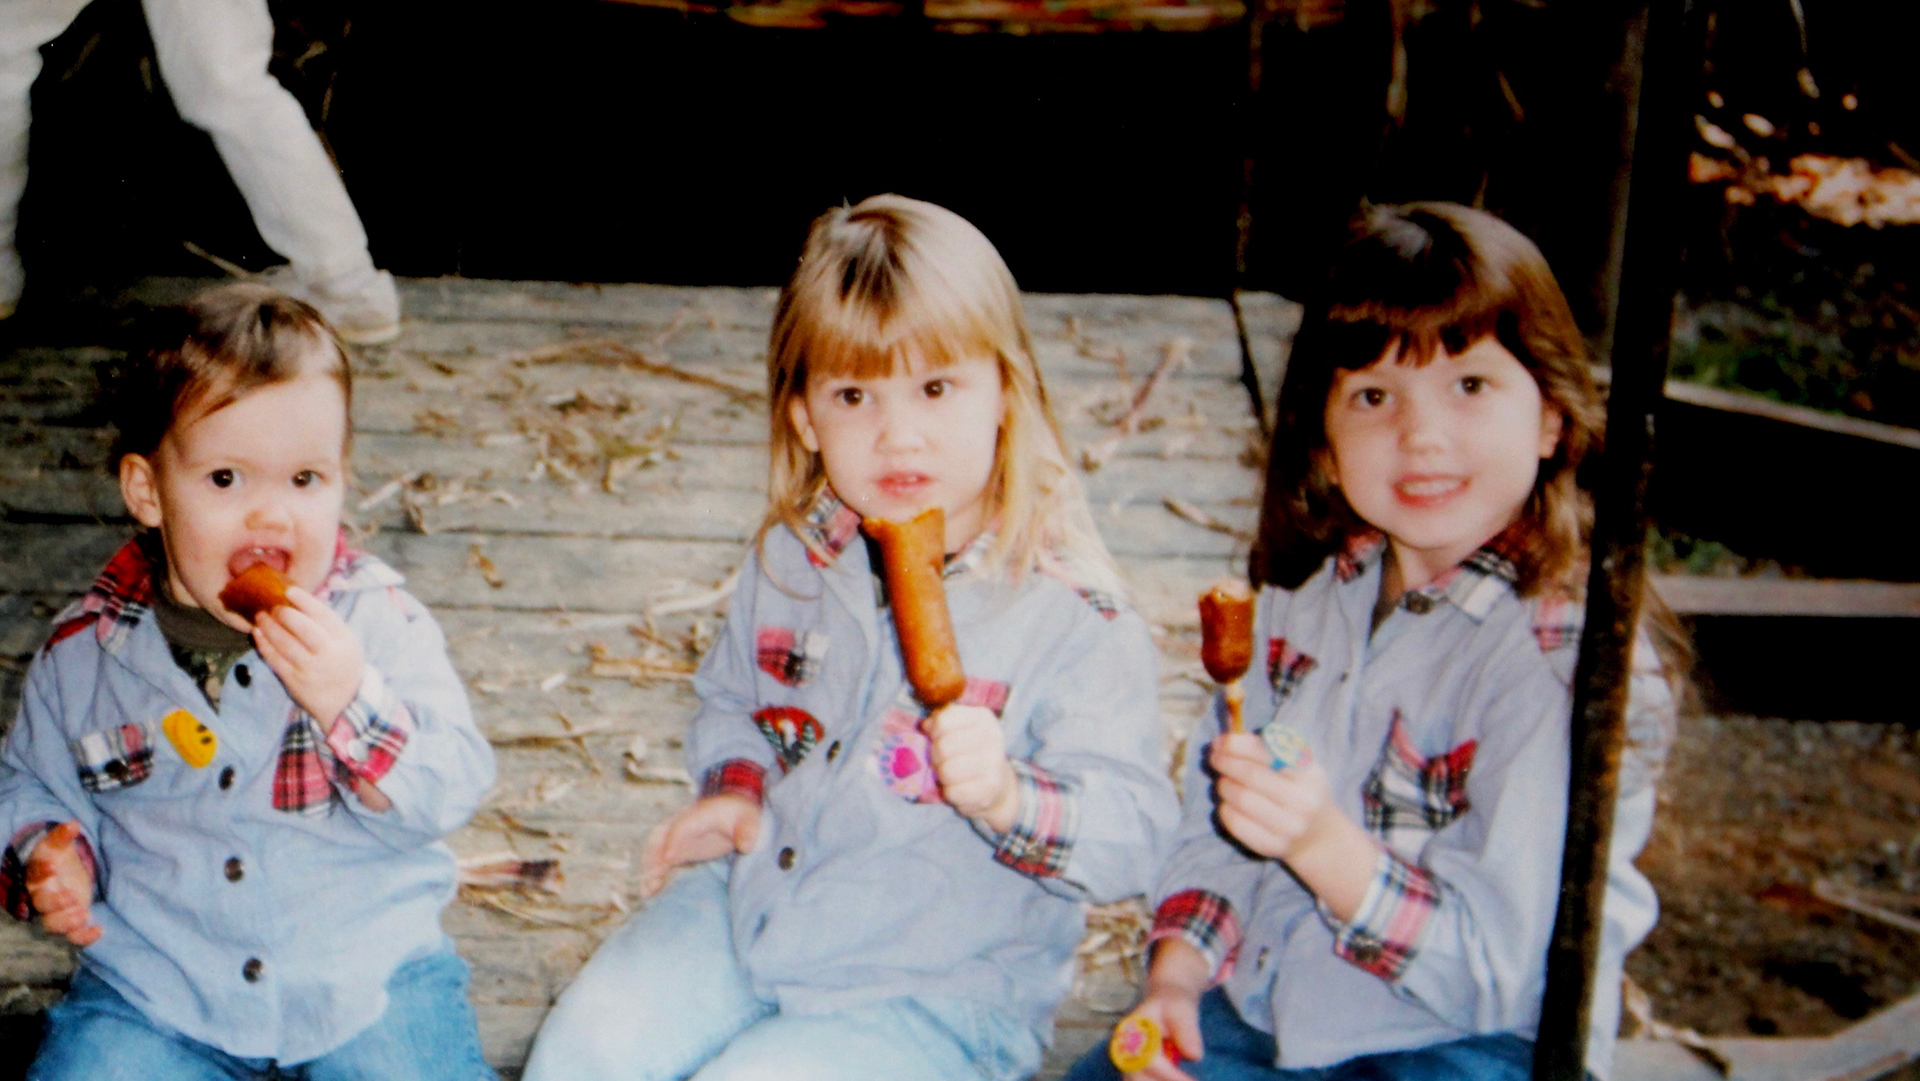 In a 2001 snapshot, the author and her sisters, Kelci and Ashton, chow down on corn dogs at the Blairsville Sorghum Festival.